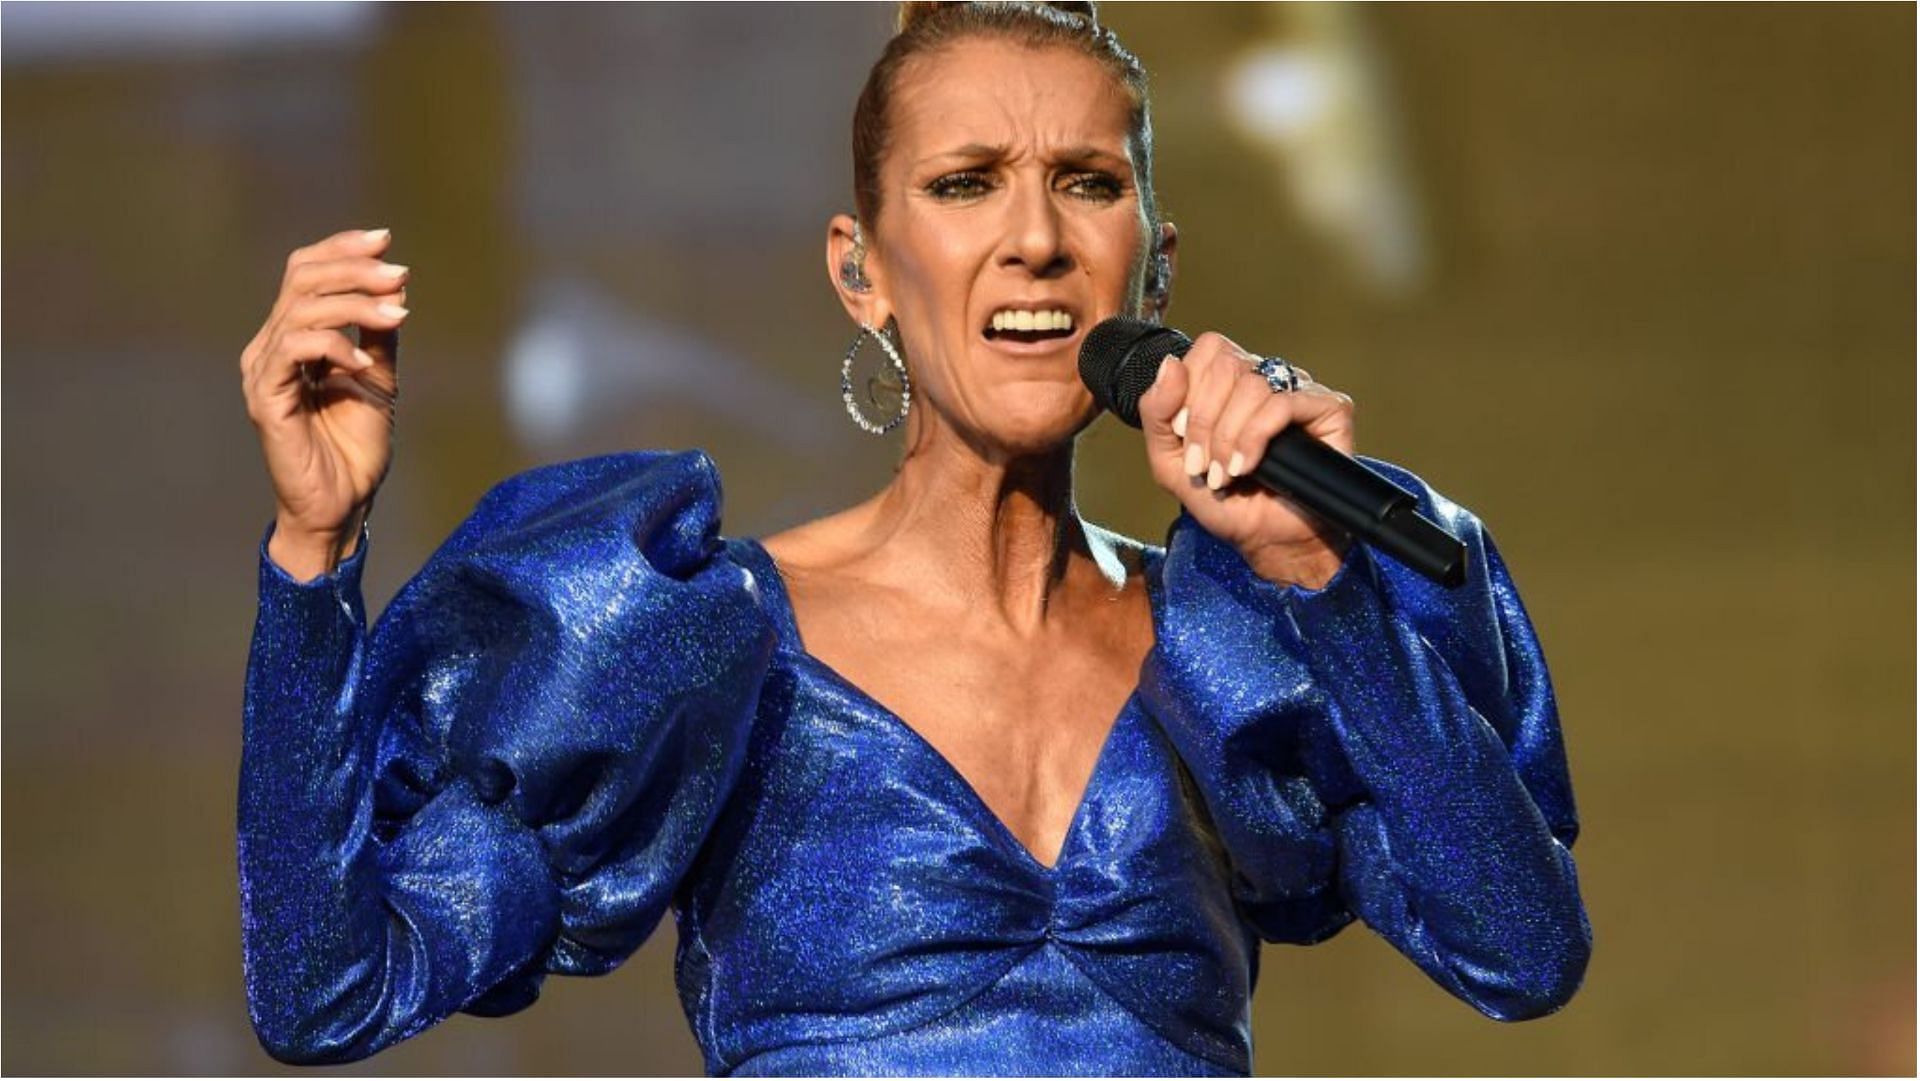 Celine Dion has released albums and singles in different languages (Image via Brian Rasic/Getty Images)